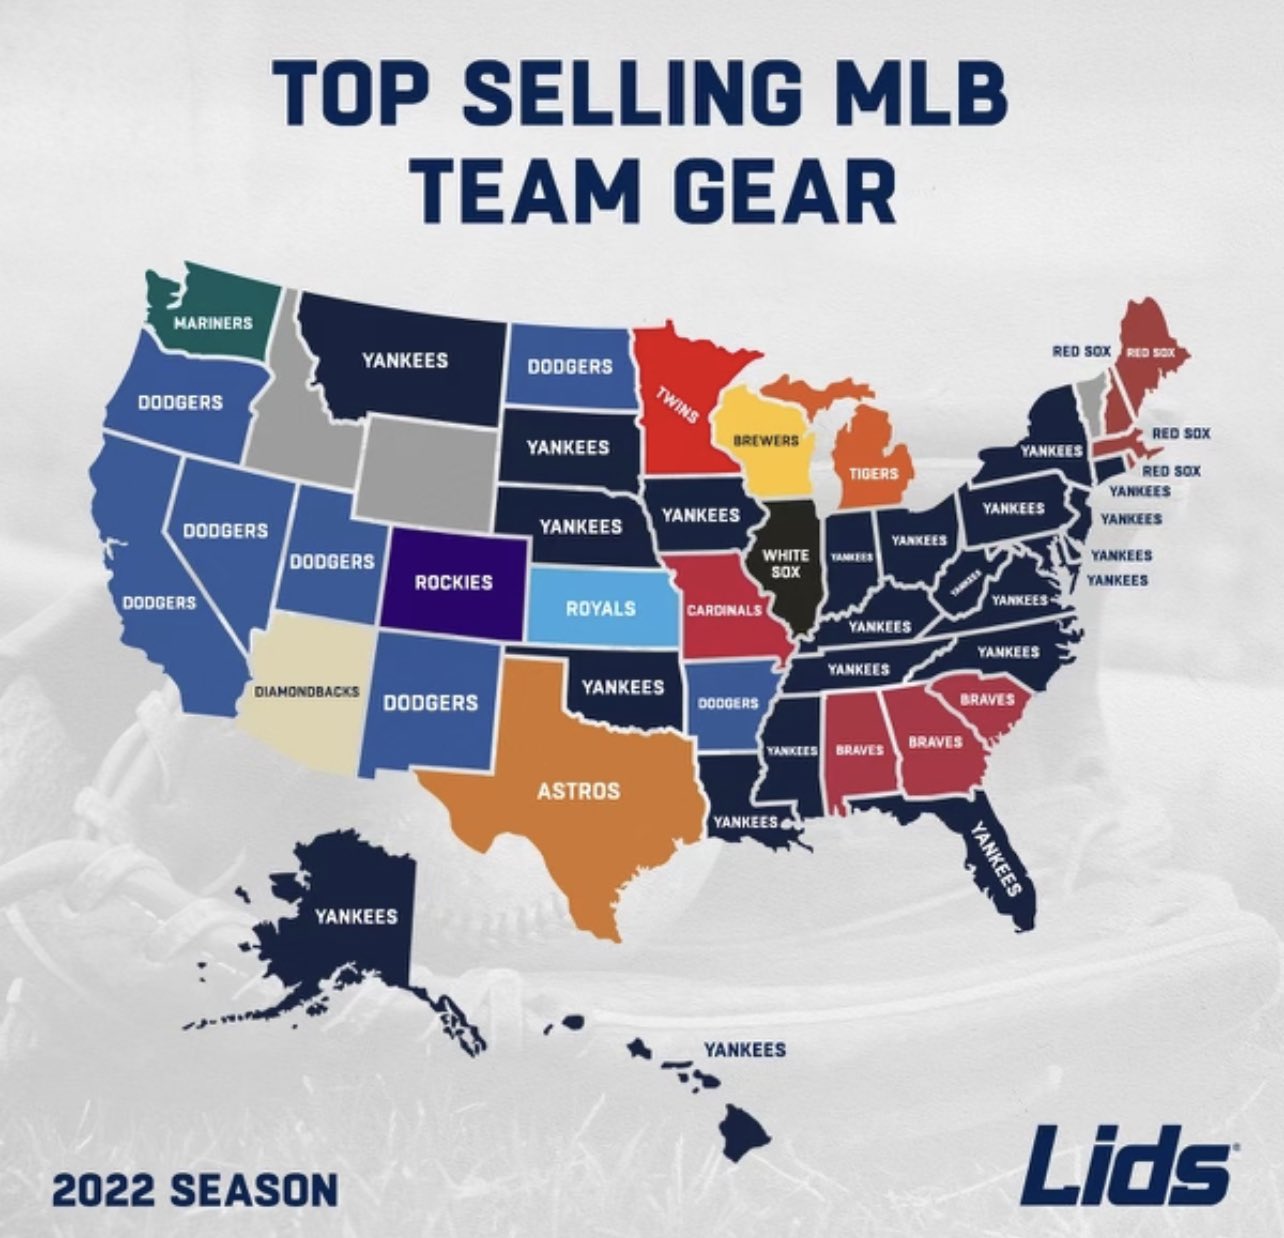 Darren Rovell on X: Top Selling MLB Gear, By Team, at @lids this season.  Yankees dominated, selling the most gear in a league-high 23 states White  Sox were third in gear sales